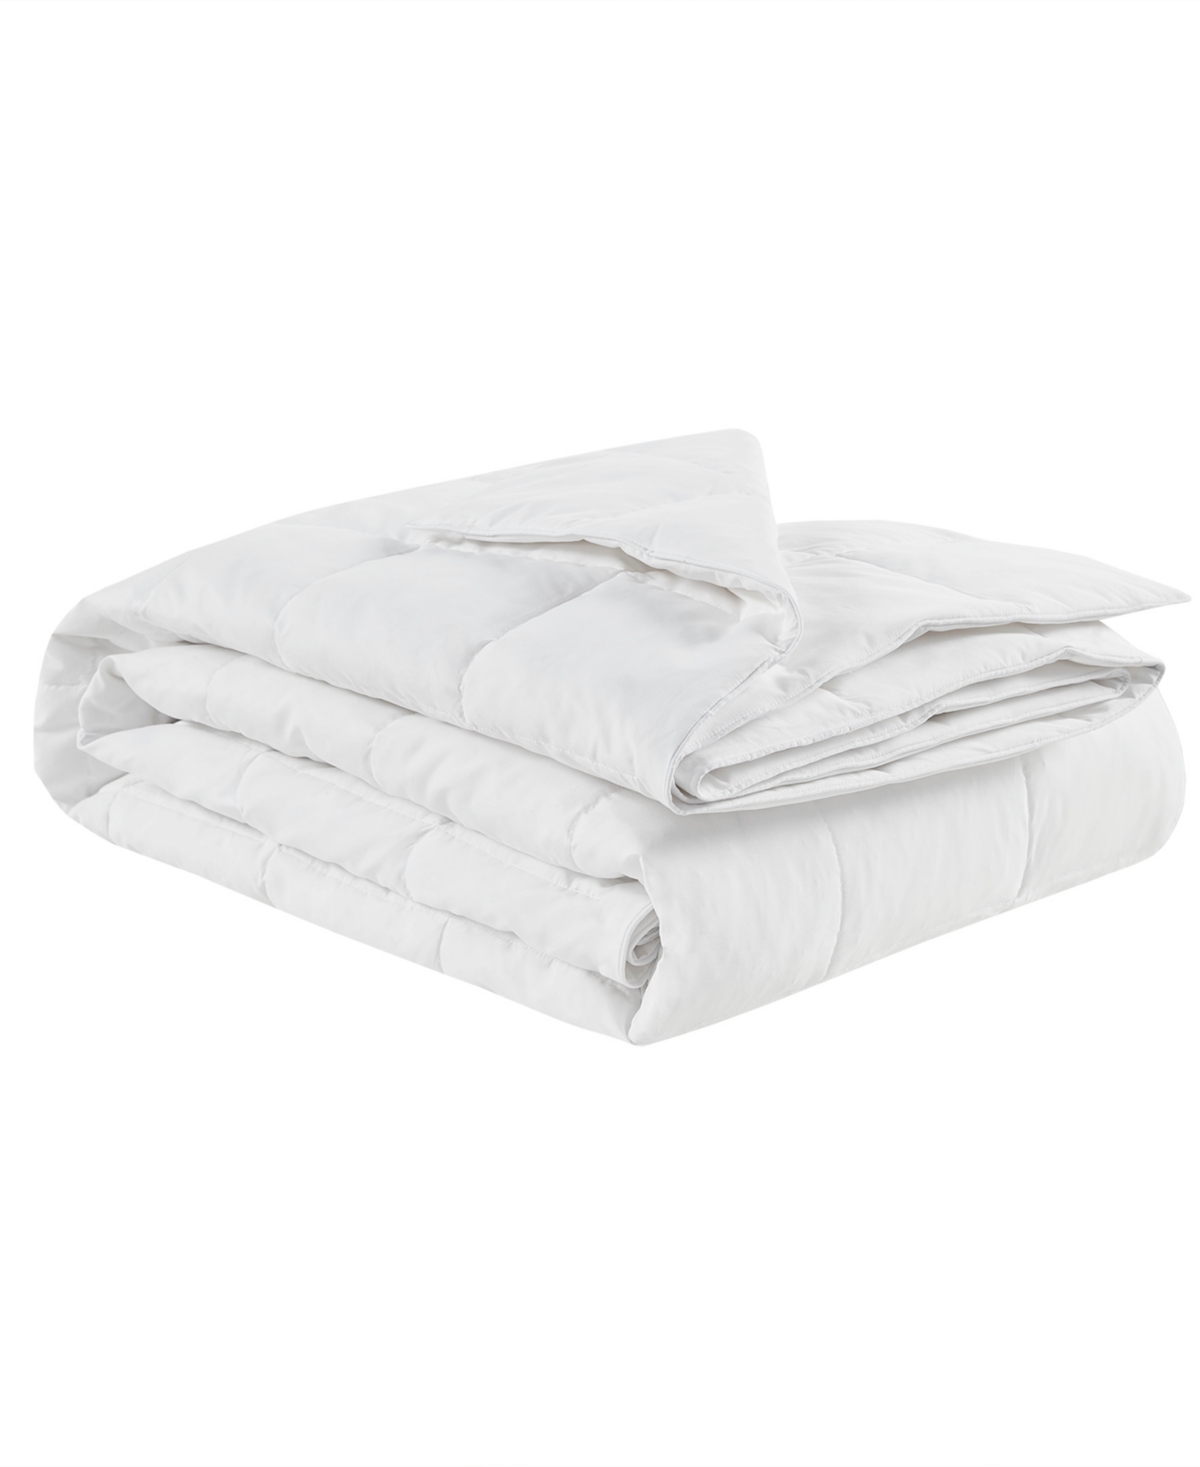 Sleep Philosophy Four Seasons Goose Feather & Goose Down Filling Blanket, Full/queen In White